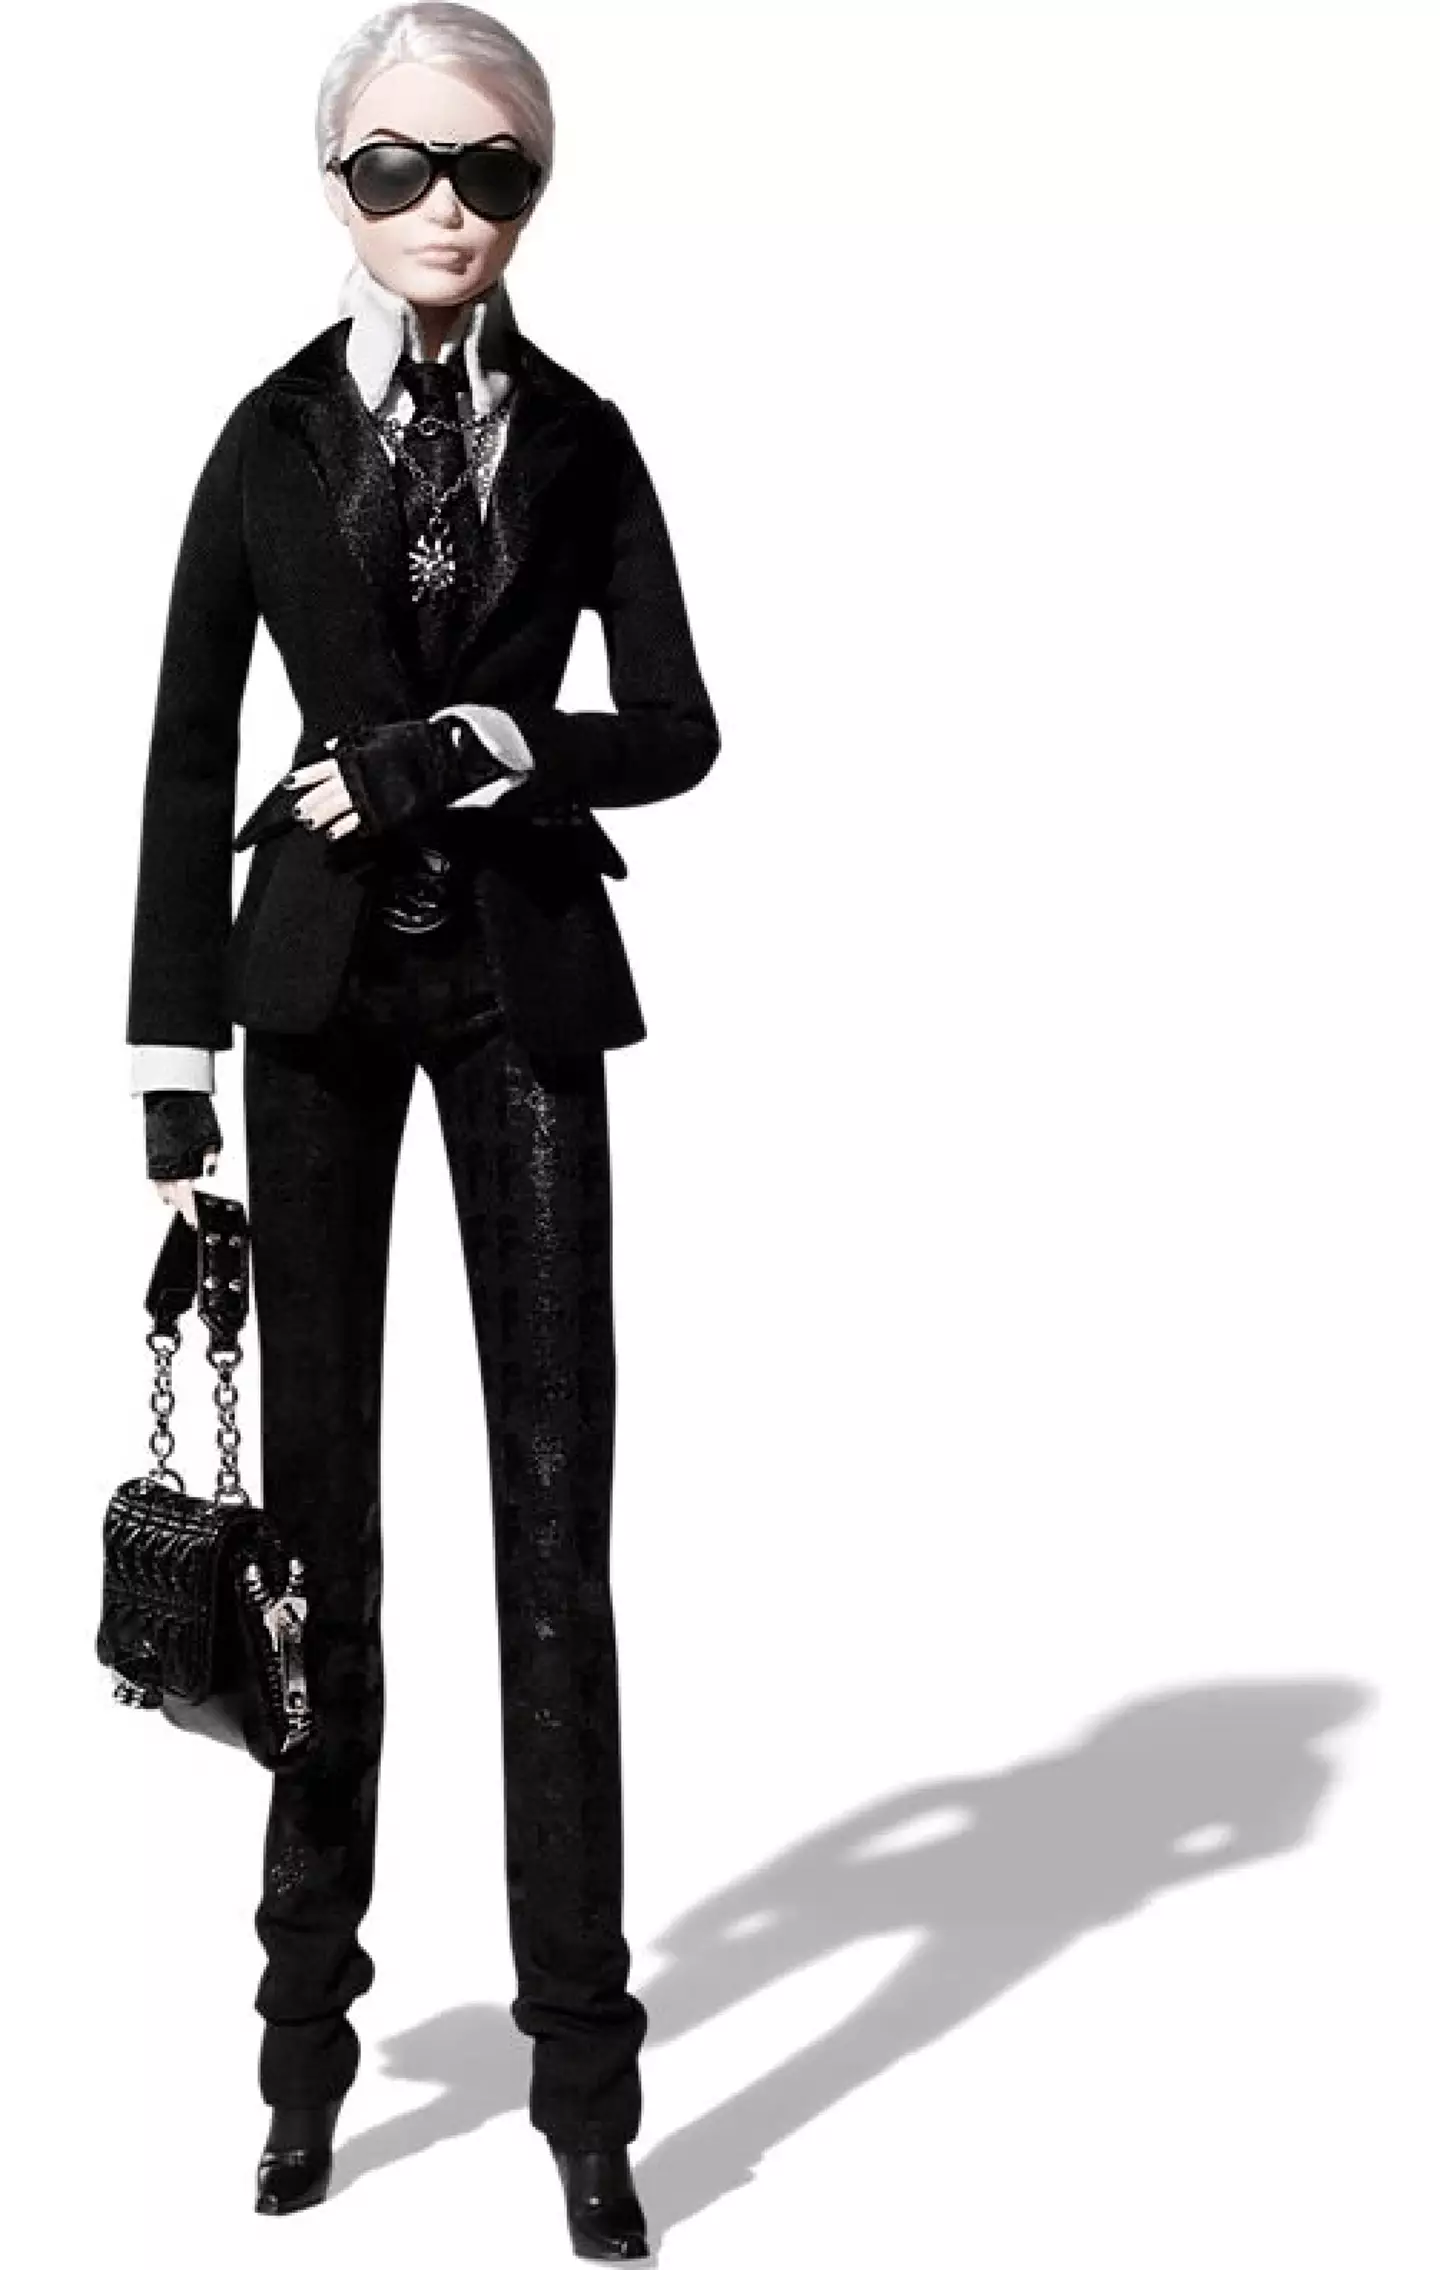 The Karl Lagerfeld doll was made as a tribute to the iconic designer.